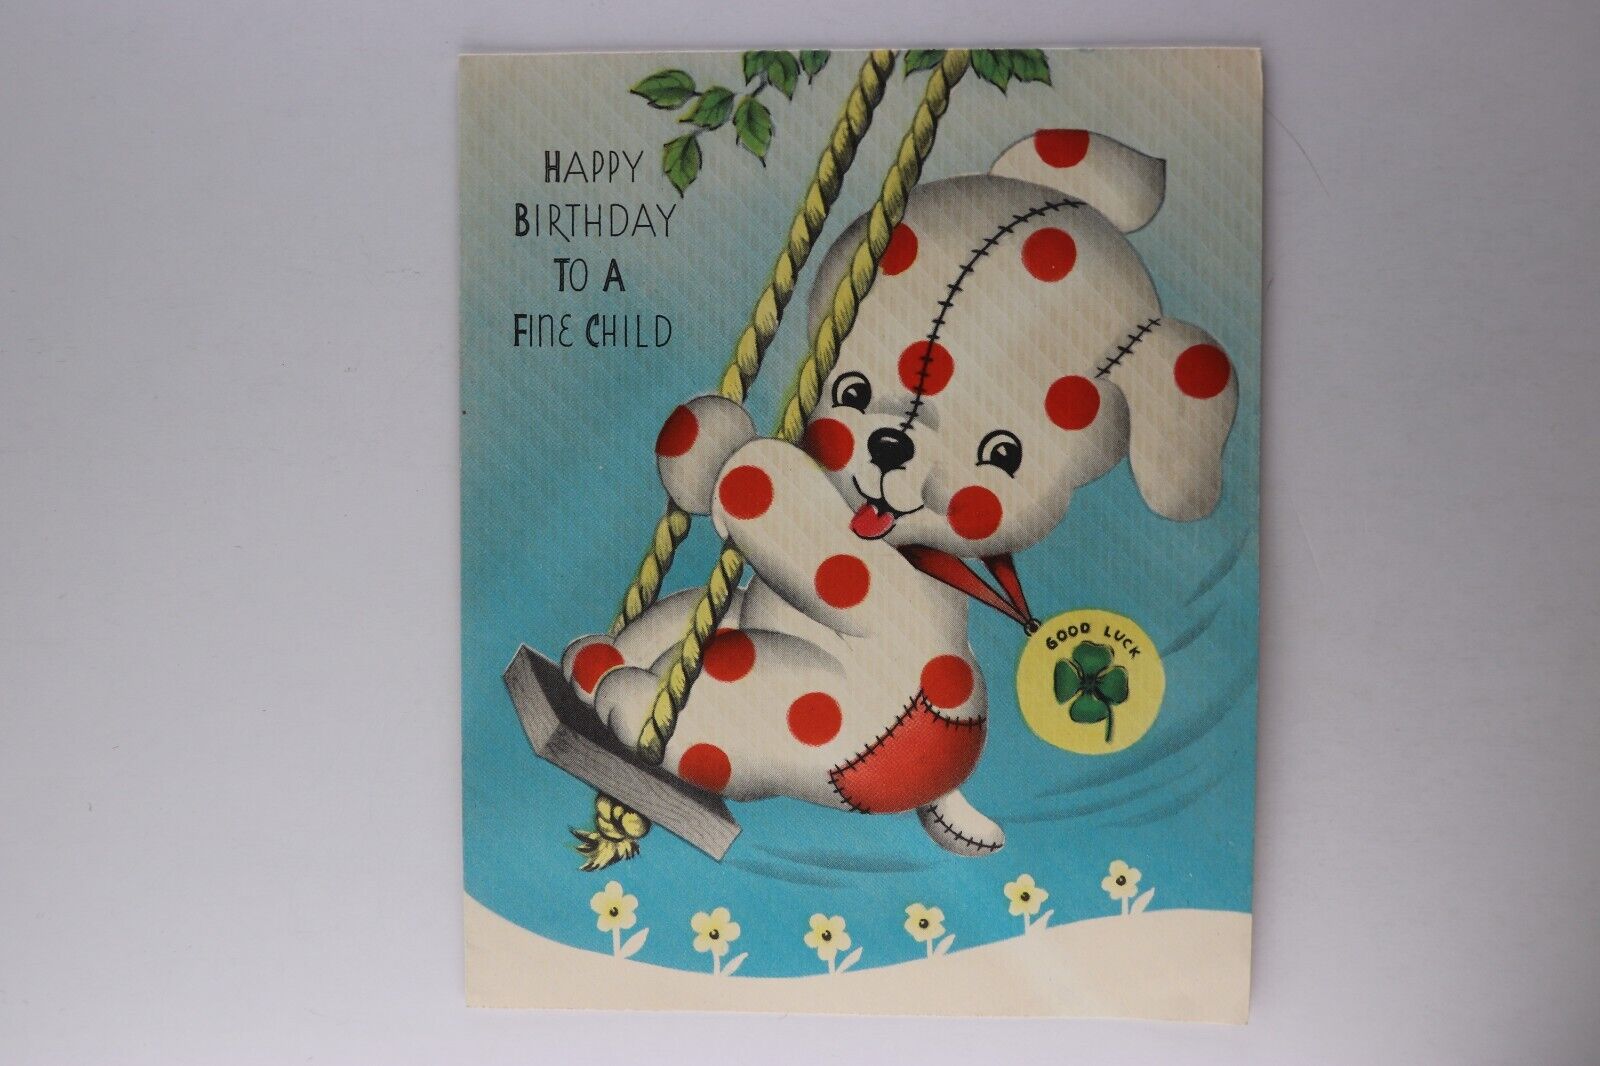 Vintage Cute Patchwork Teddy Bear Happy Birthday to Child Greeting Card c.1920's